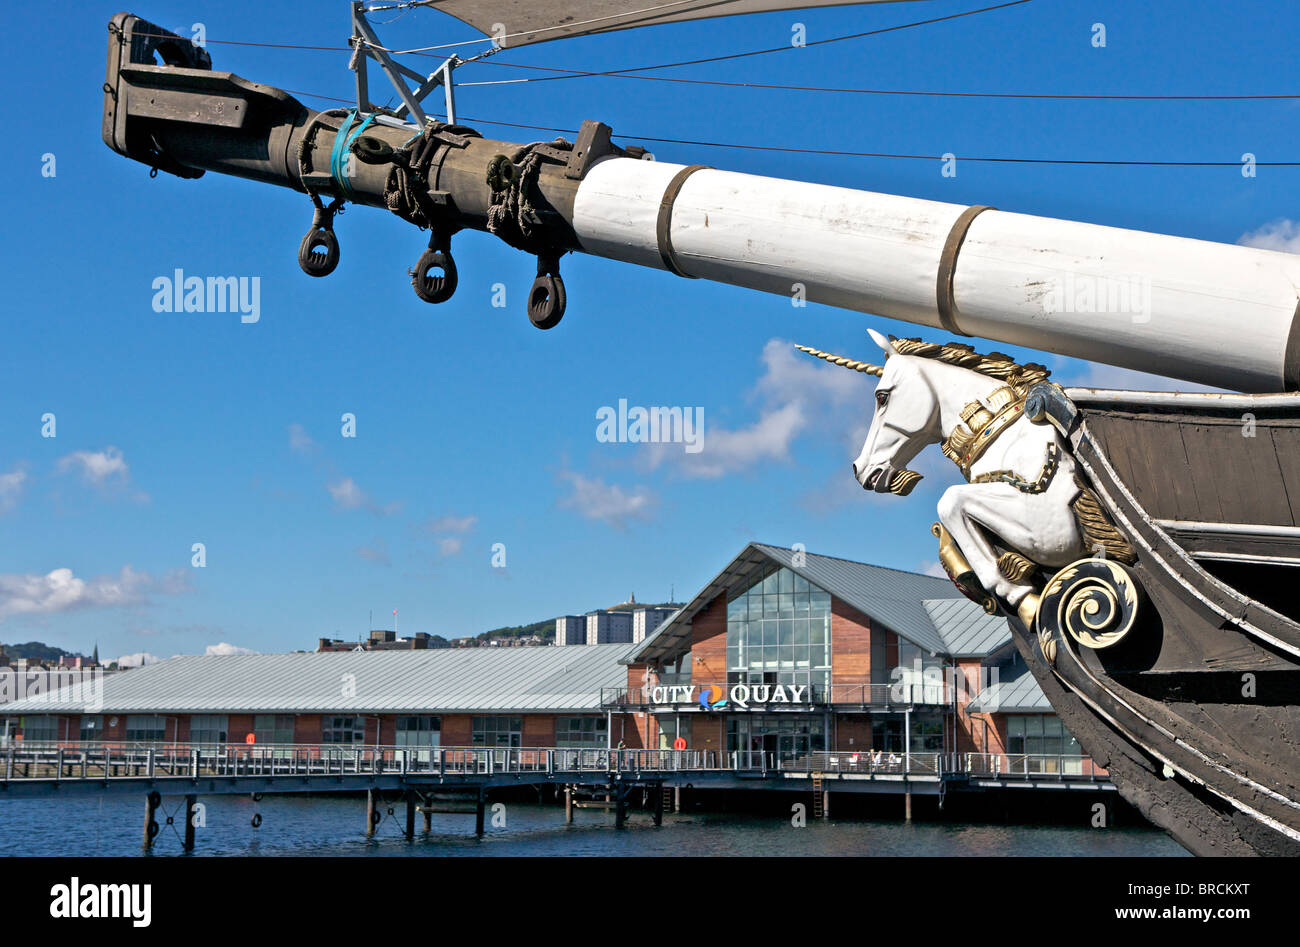 The Frigate Unicorn is the oldest British warship and is docked in Dundee, Scotland. Stock Photo